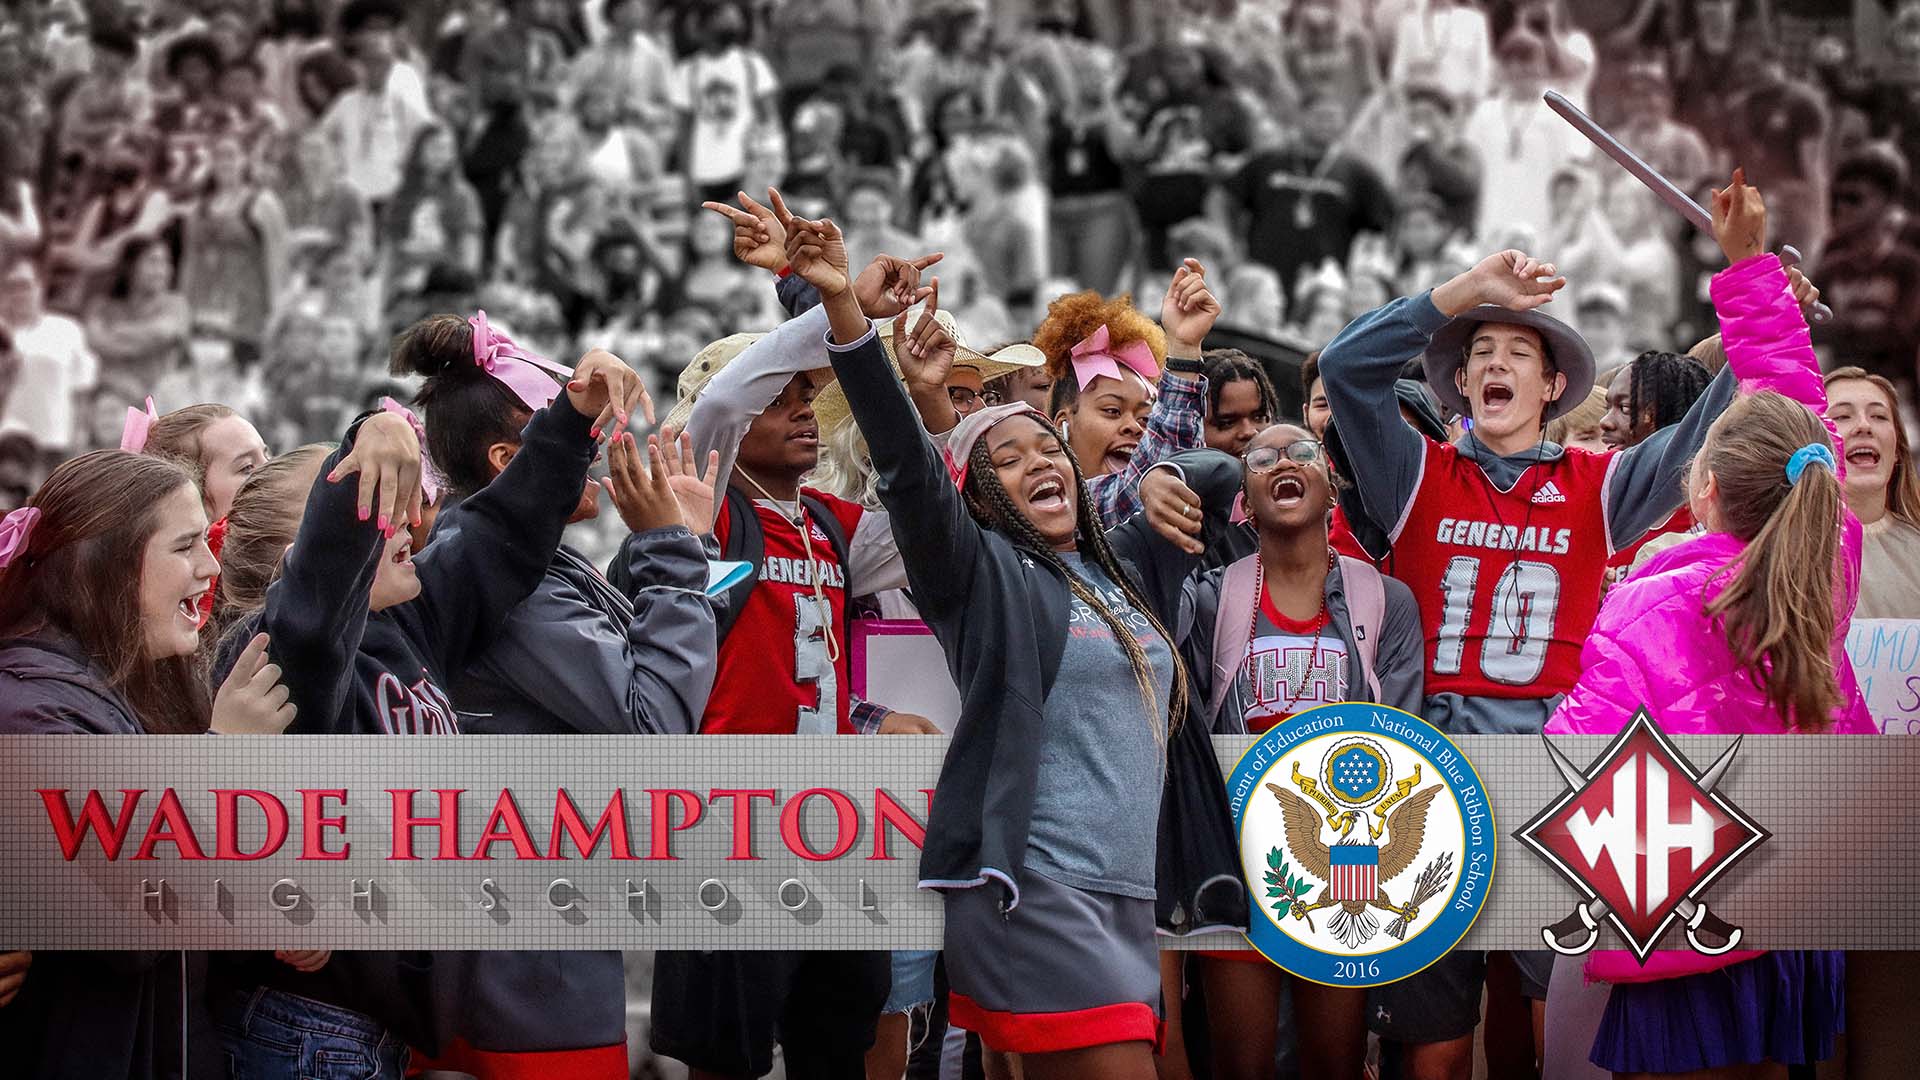 Several students celebrating outside a crowd. The name of the school reads Wade Hampton High School with a Blue Ribbon Schools logo and the Wade Hampton shield logo.